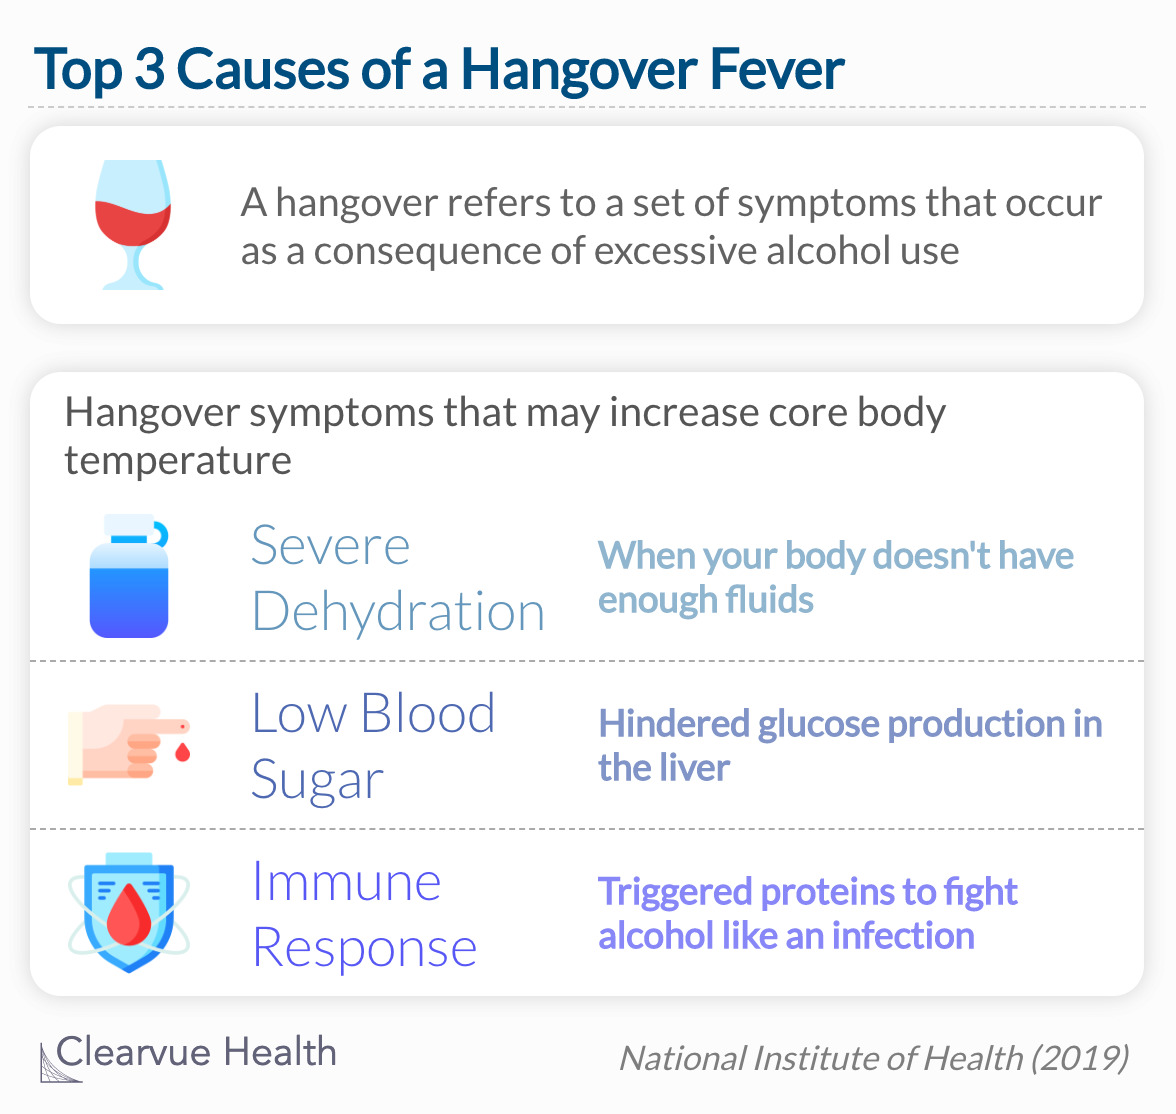 Fever during a hangover is often caused by severe dehydration and low blood sugar. 